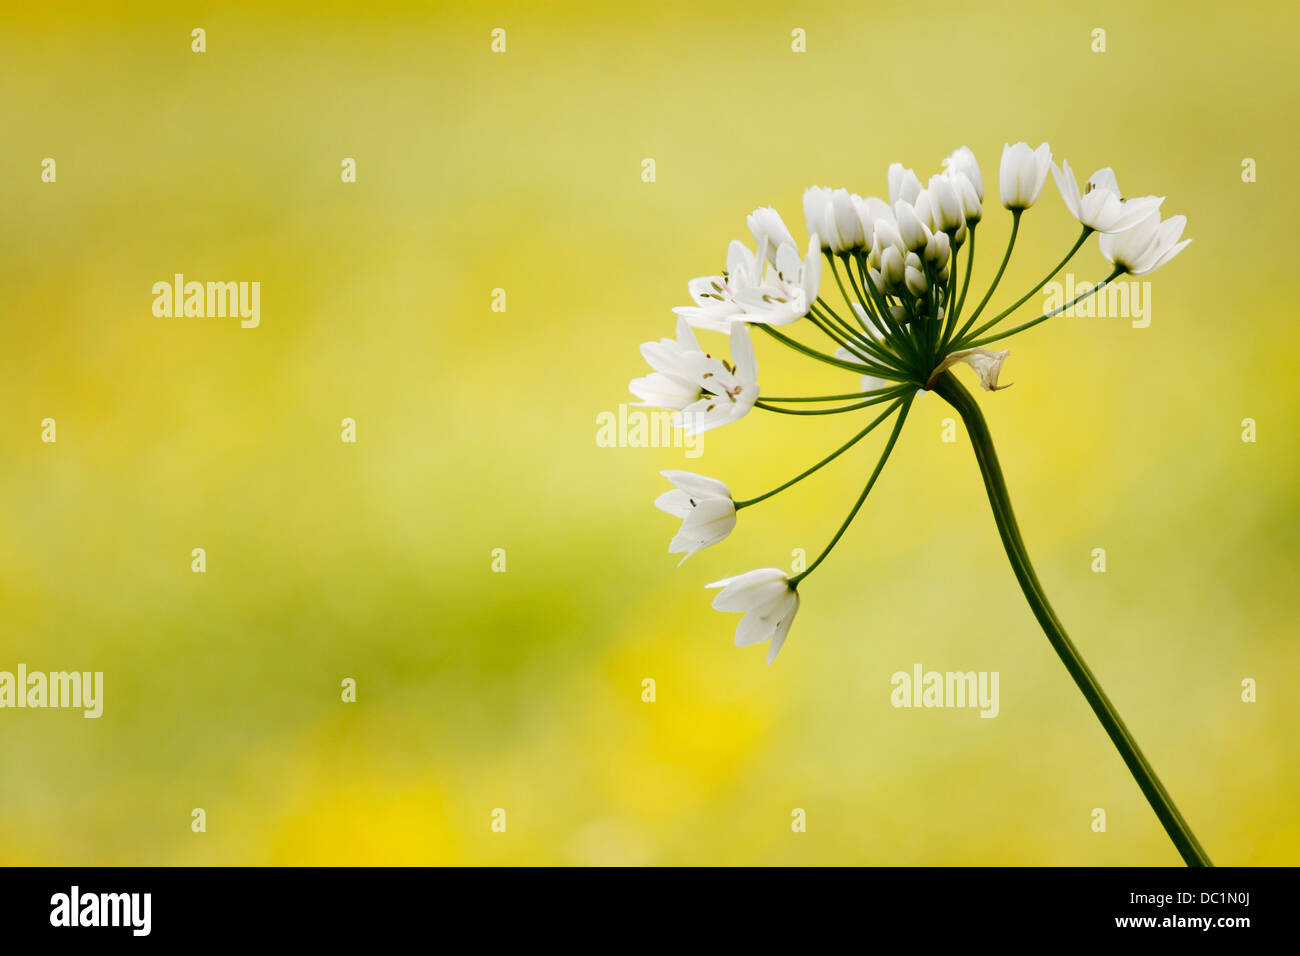 A beautiful close-up of a white allium flower on a yellow and green background. Stock Photo